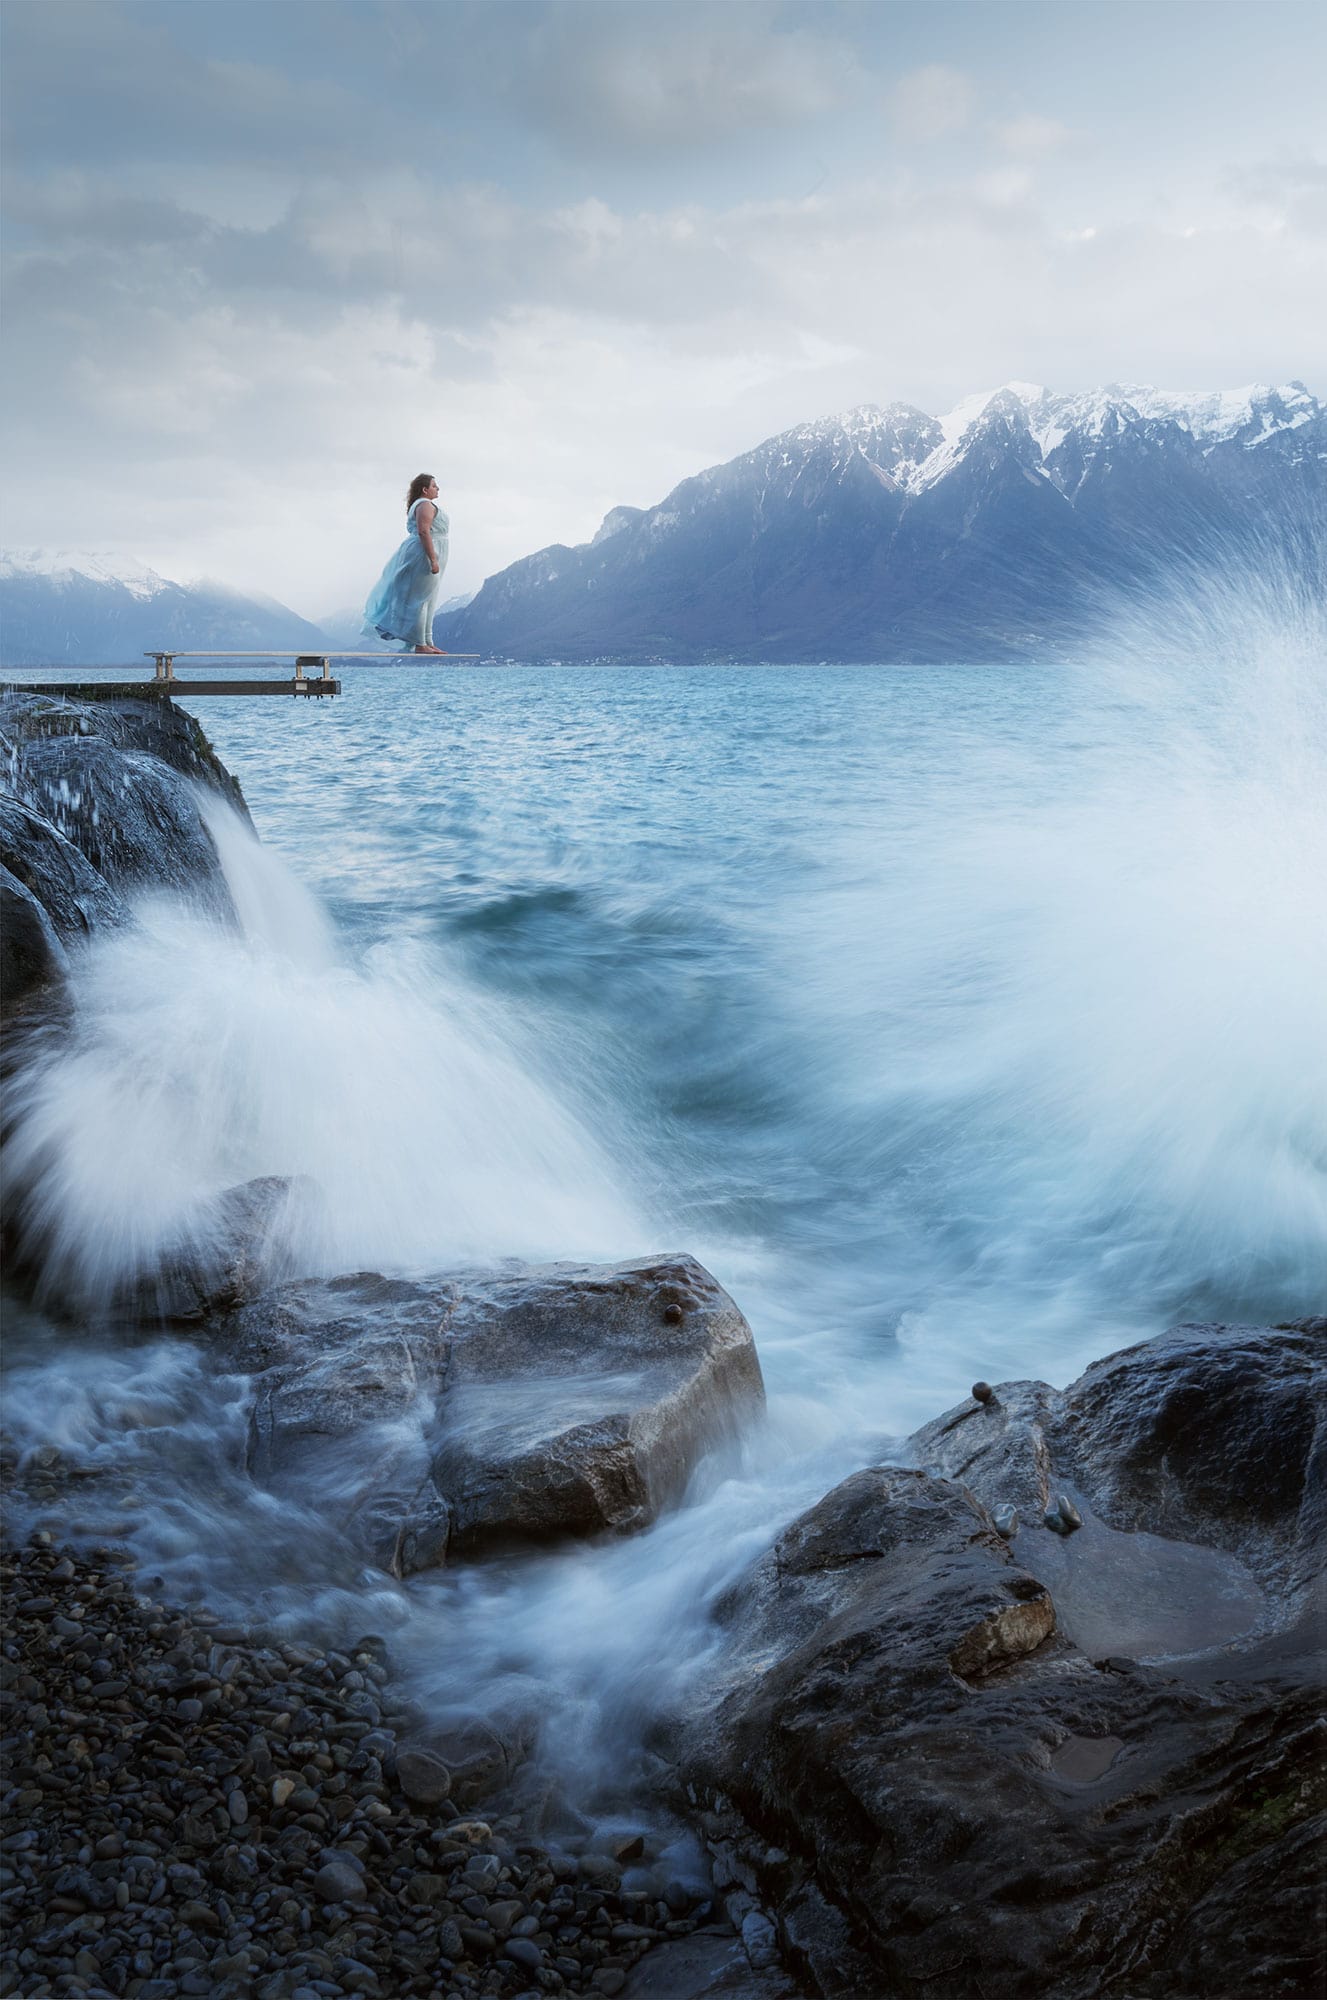 A self-portrait depicting a person wearing a turquoise princess gown, standing confidently on a diving board in the Lavaux region, overlooking Lake Geneva in Switzerland. The landscape photography captures the scene during the blue hour, with big waves crashing against the shore and the wind blowing fiercely. The figure gazes out at the vast expanse of the lake, surrounded by the stunning Swiss scenery.